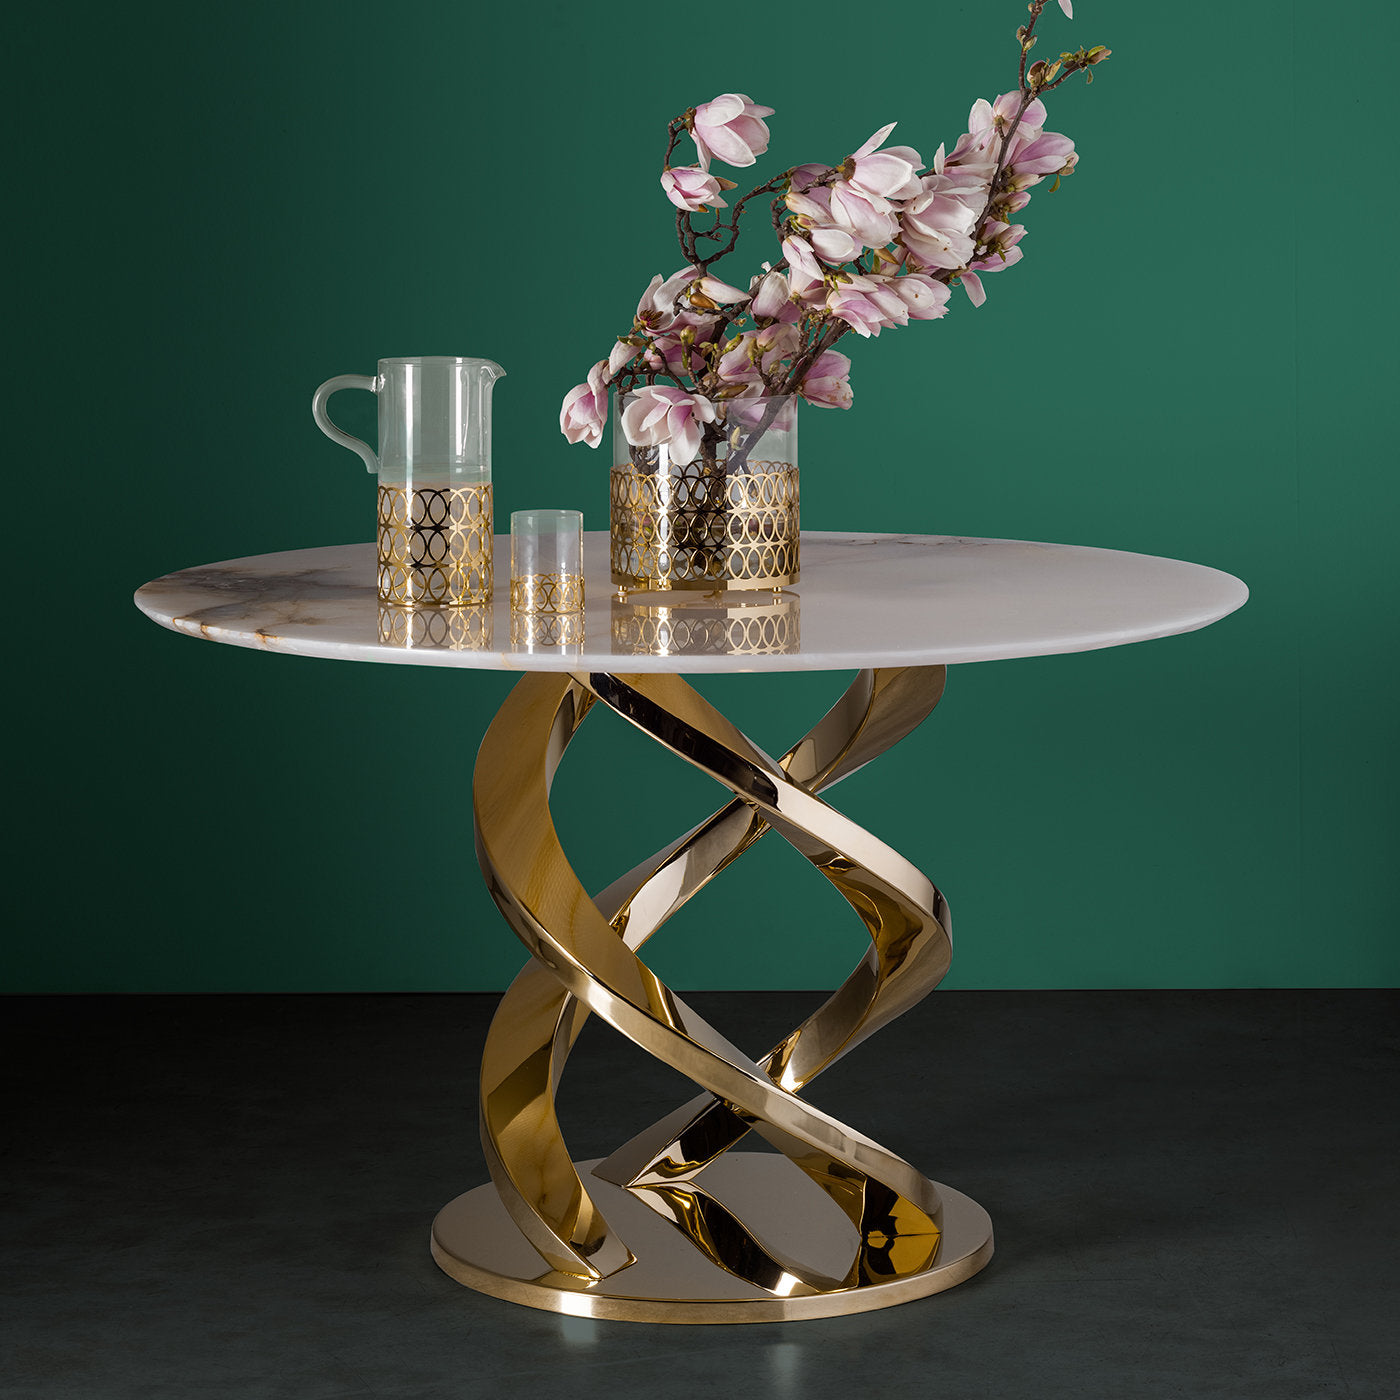 Cerberus Dining Table with Onyx Gold Marble Top - Alternative view 1